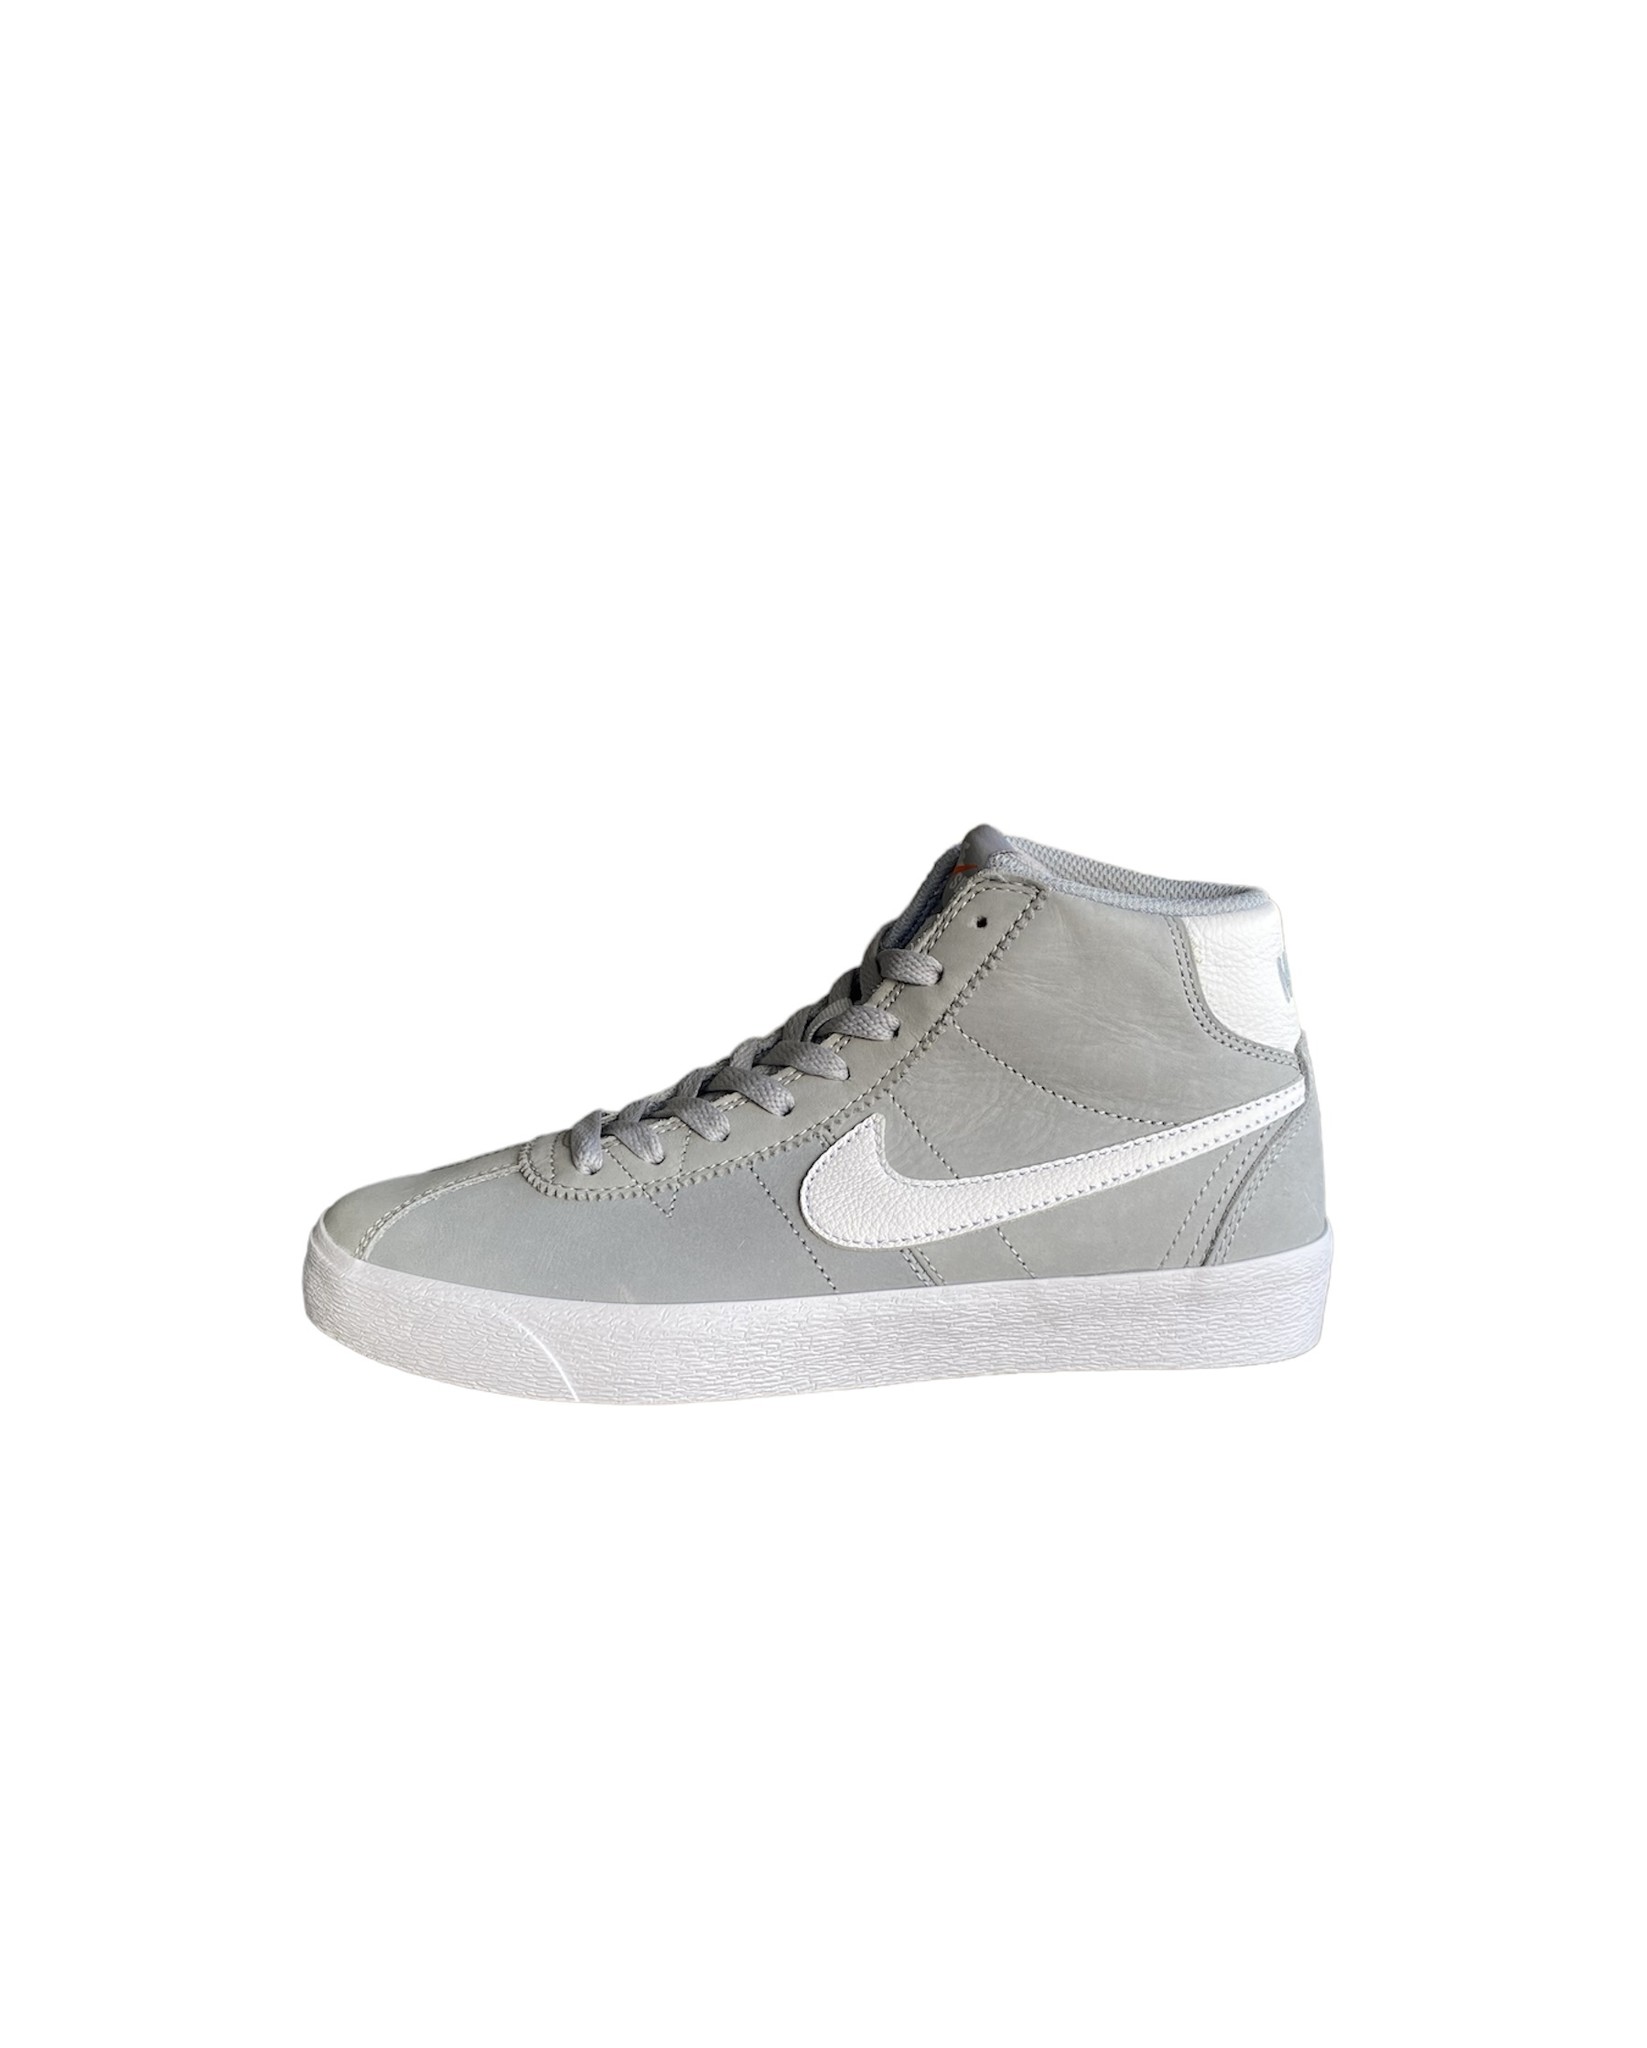 hypothese Accommodatie overal WMNS Nike SB Bruin Hi ISO (Wolf Grey) - Pawnshop Skate